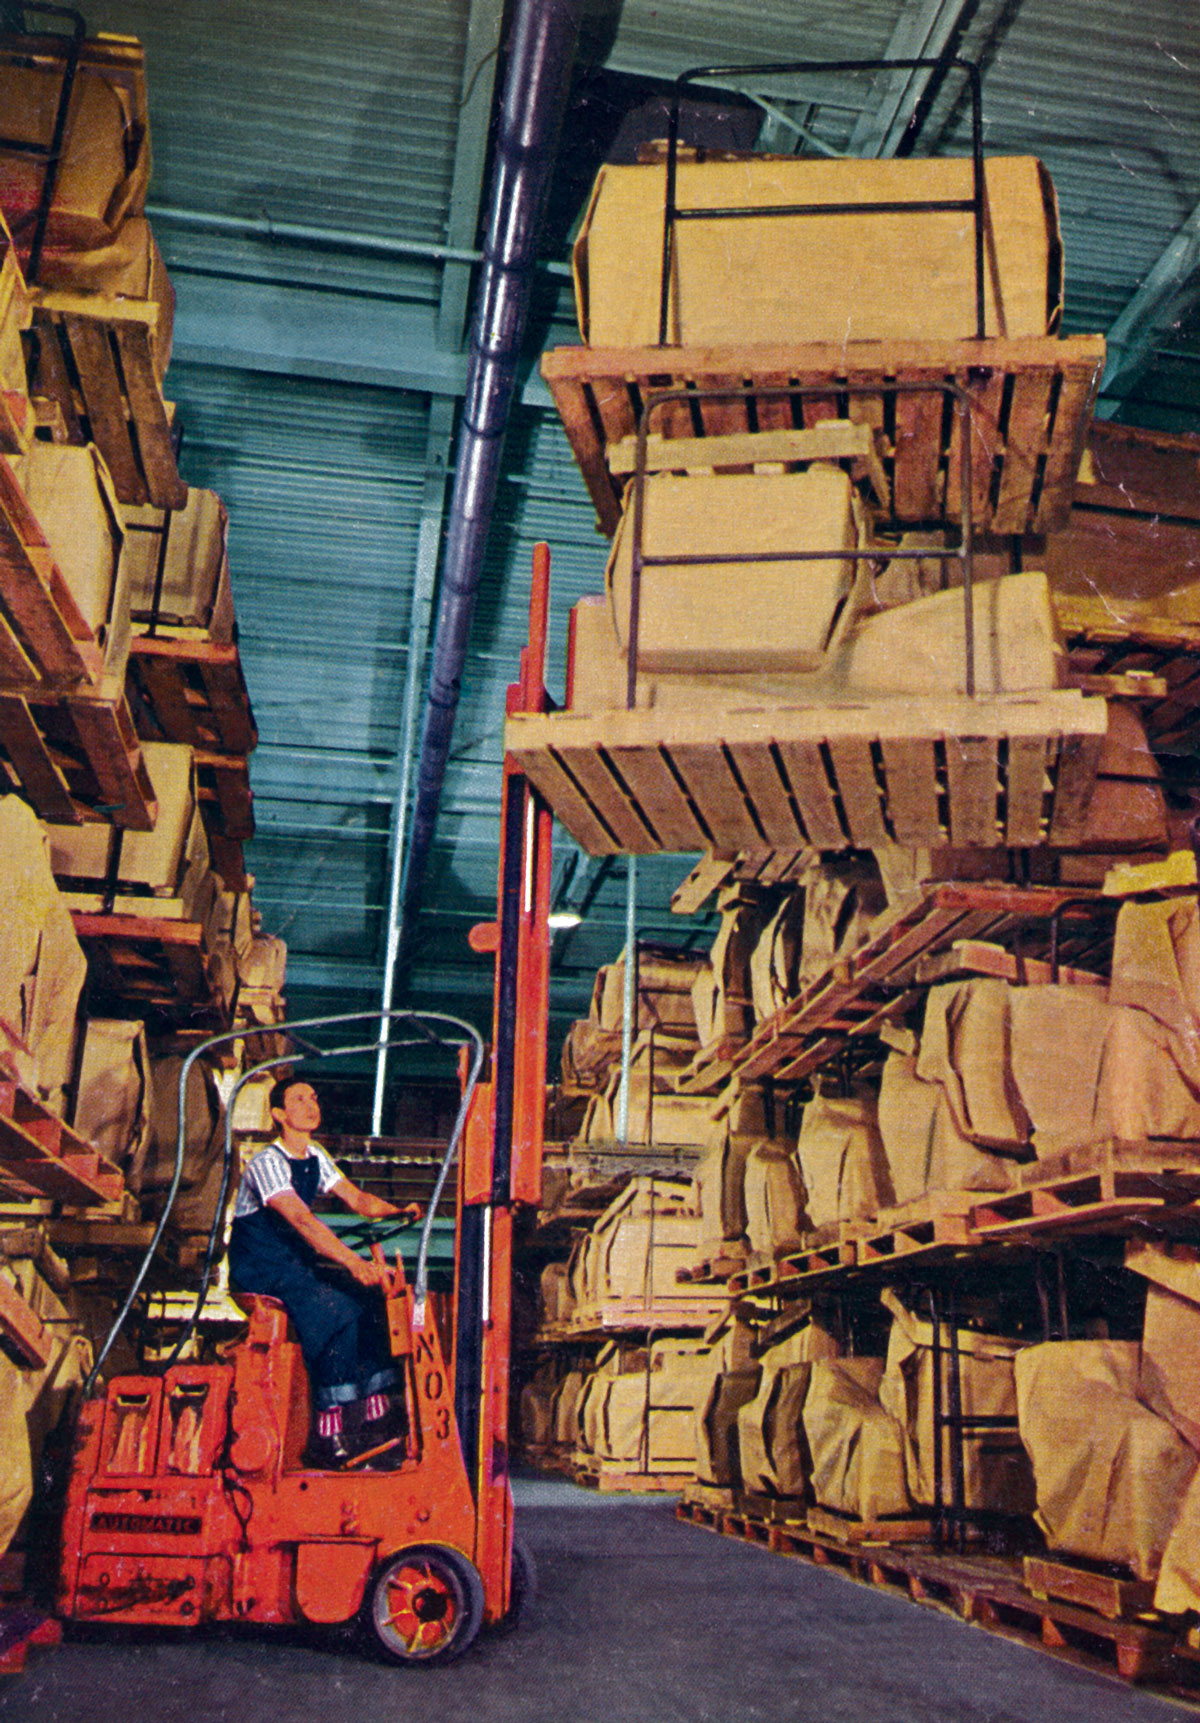 Having proven their worth in the war effort, pallets became a staple of postwar industry. A forklift operator moves goods at a Salt Lake City warehouse.